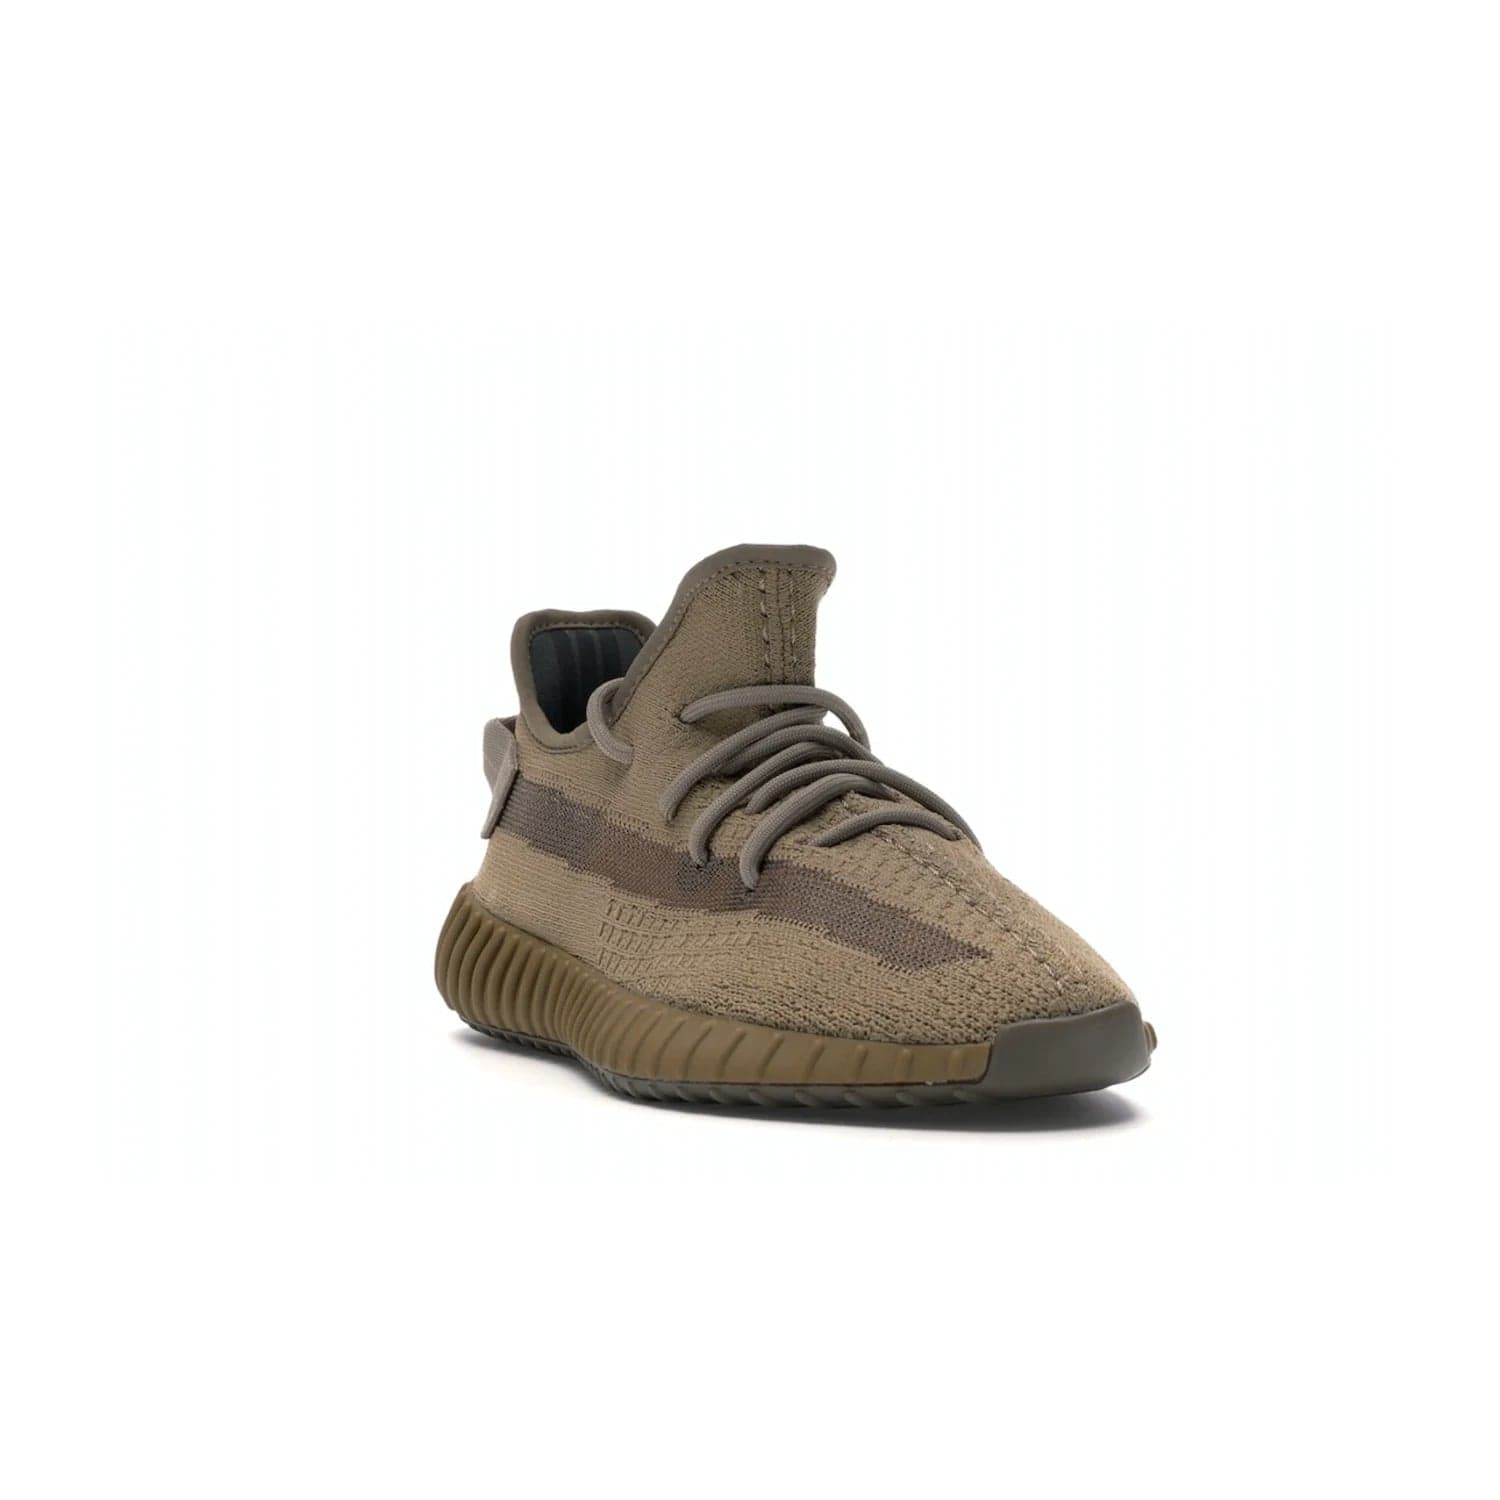 adidas Yeezy Boost 350 V2 Earth - Image 7 - Only at www.BallersClubKickz.com - Abstract style with the adidas Yeezy Boost 350 V2 Earth. Crafted with mud Primeknit upper, mud Boost and interior, and a translucent side stripe. Regional exclusive in Earth/Earth/Earth colorway, these fashionable sneakers released in February 2020. Showcase your style with the Yeezy 350 V2 Earth.